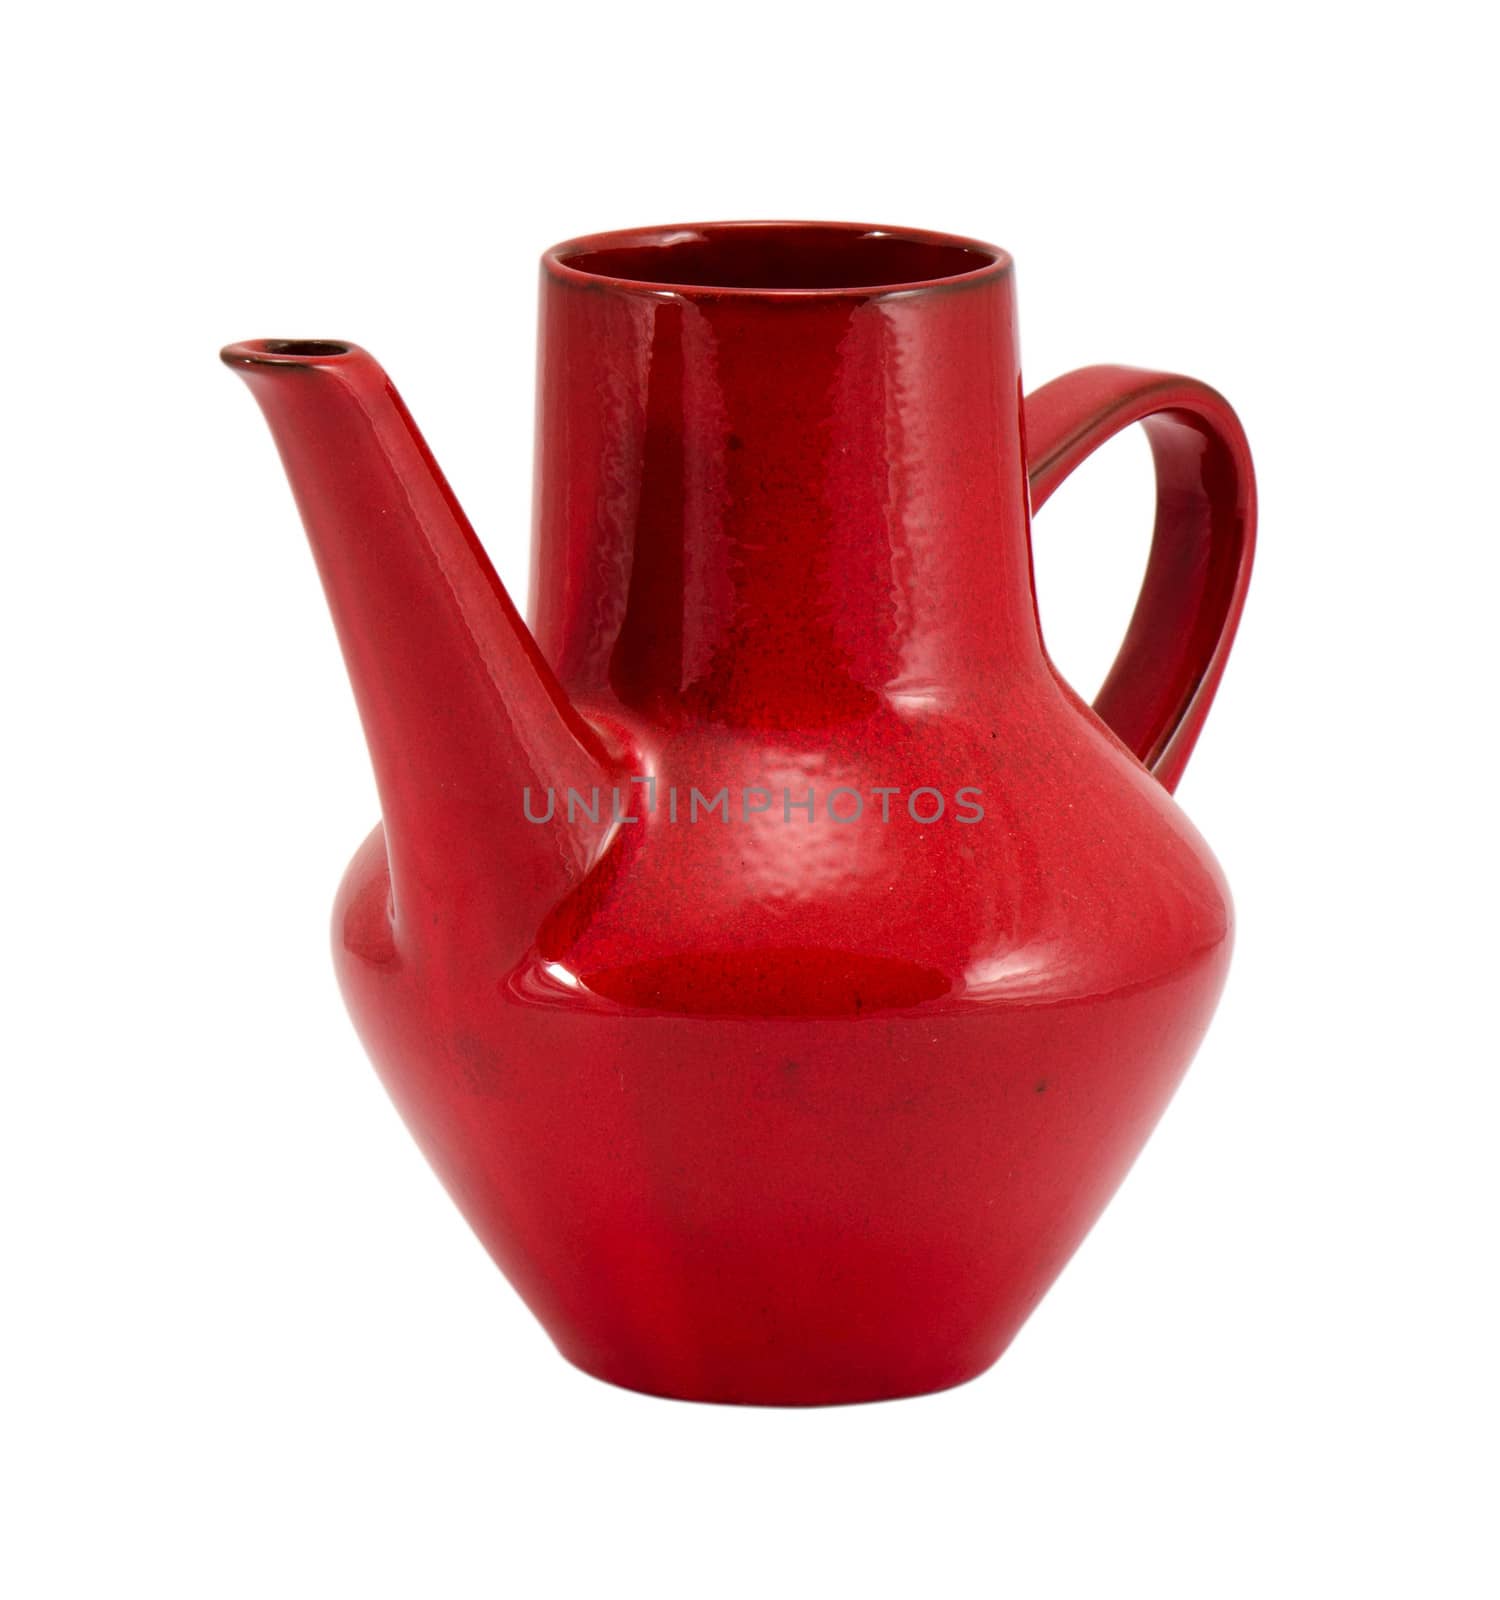 clay pitcher red color object with small handle isolated on white background. home decoration.